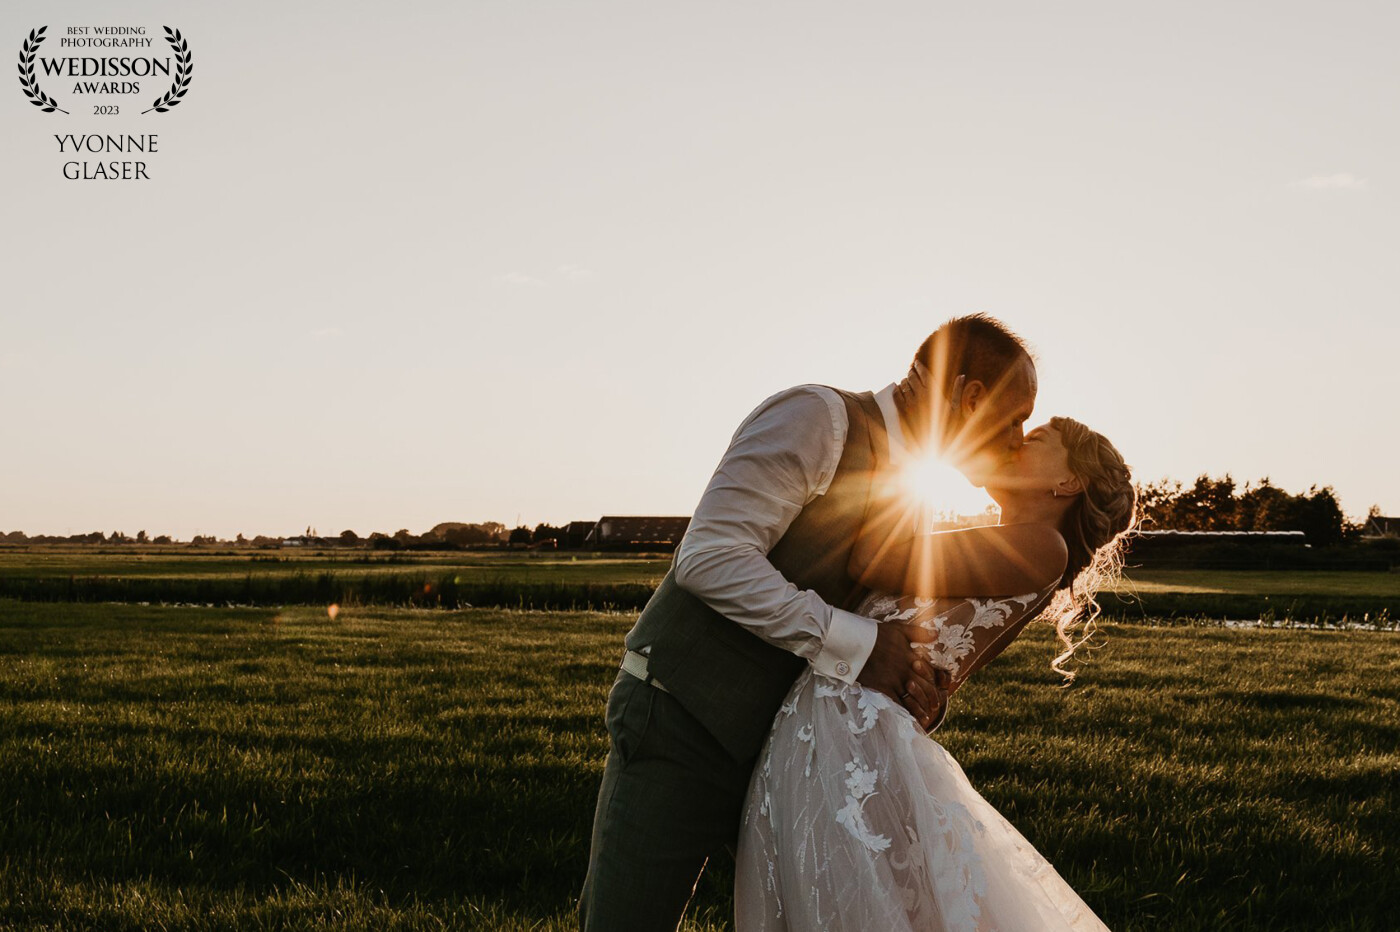 I always take a moment with the bridal couple during the golden hour